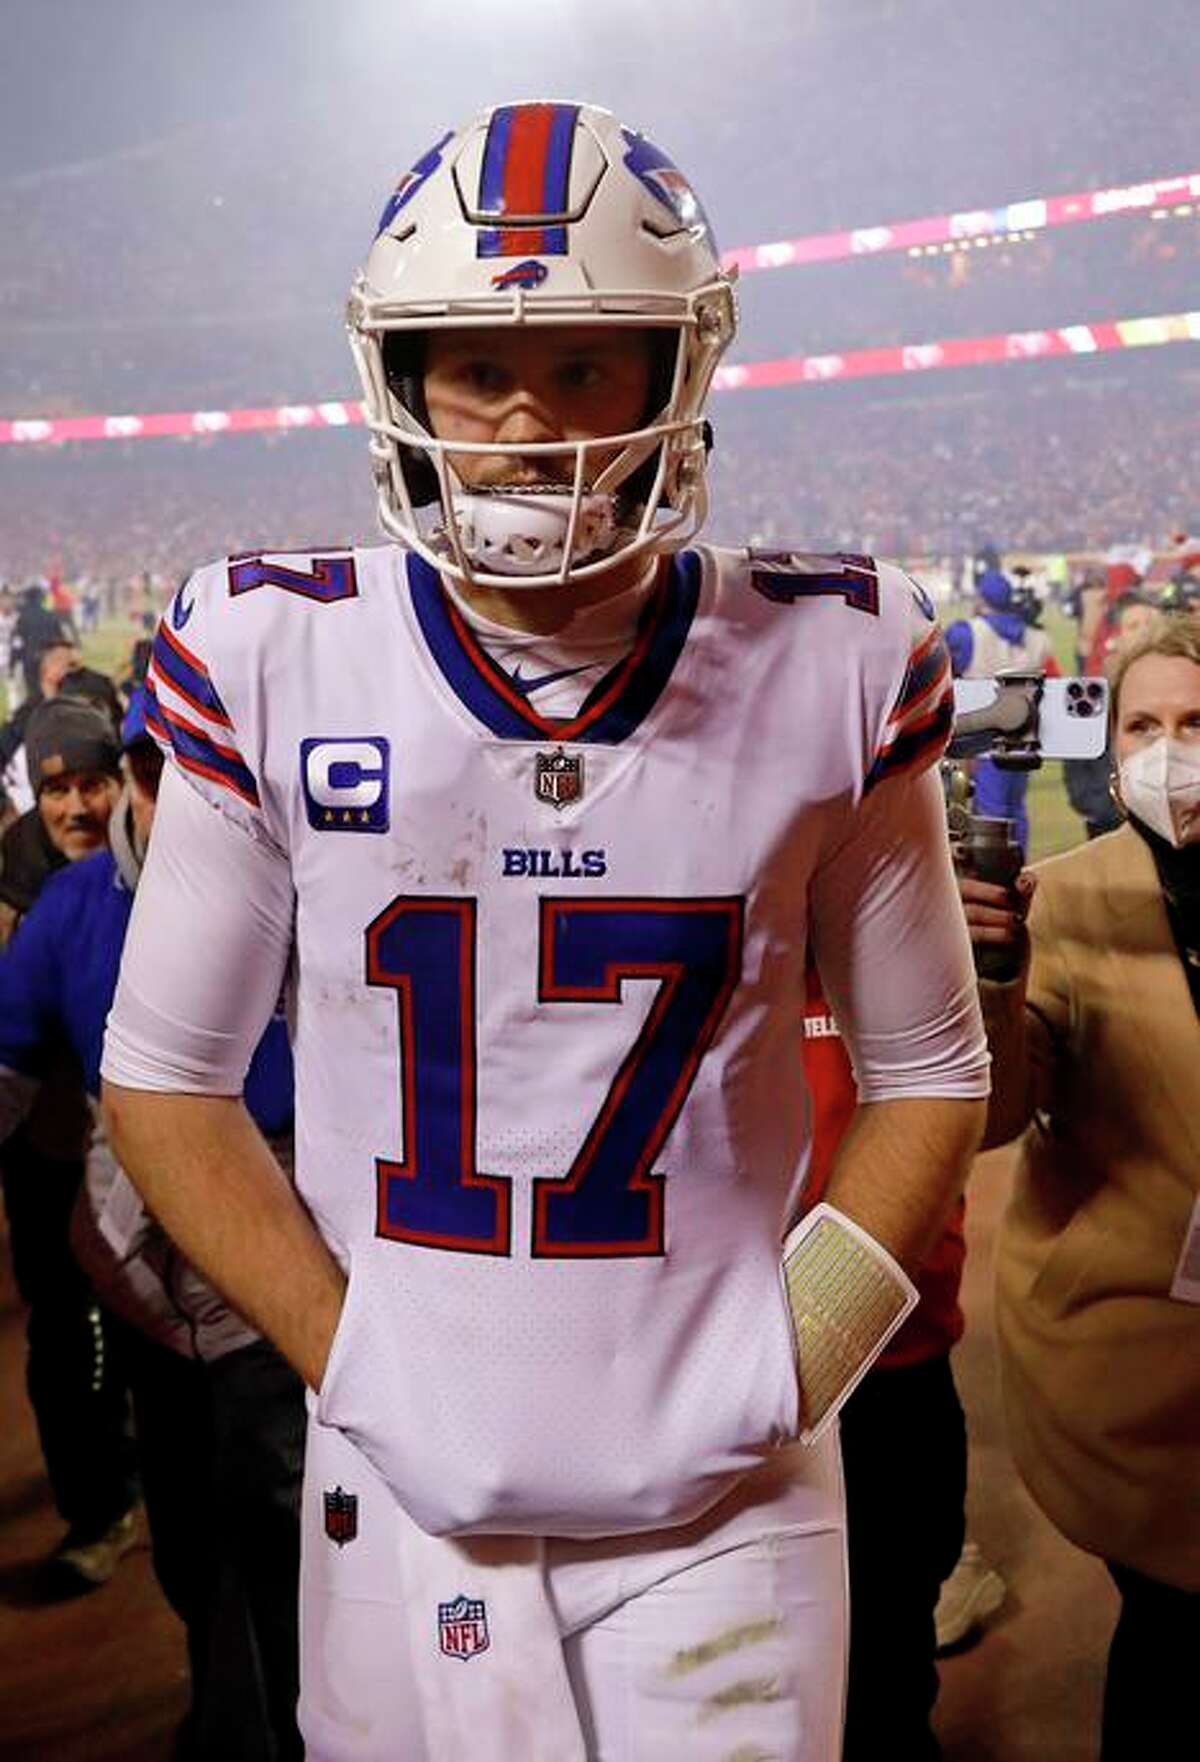 Bills QB Josh Allen threw a TD pass to take the lead with 13 seconds left in the 4th quarter, then never got the ball again.